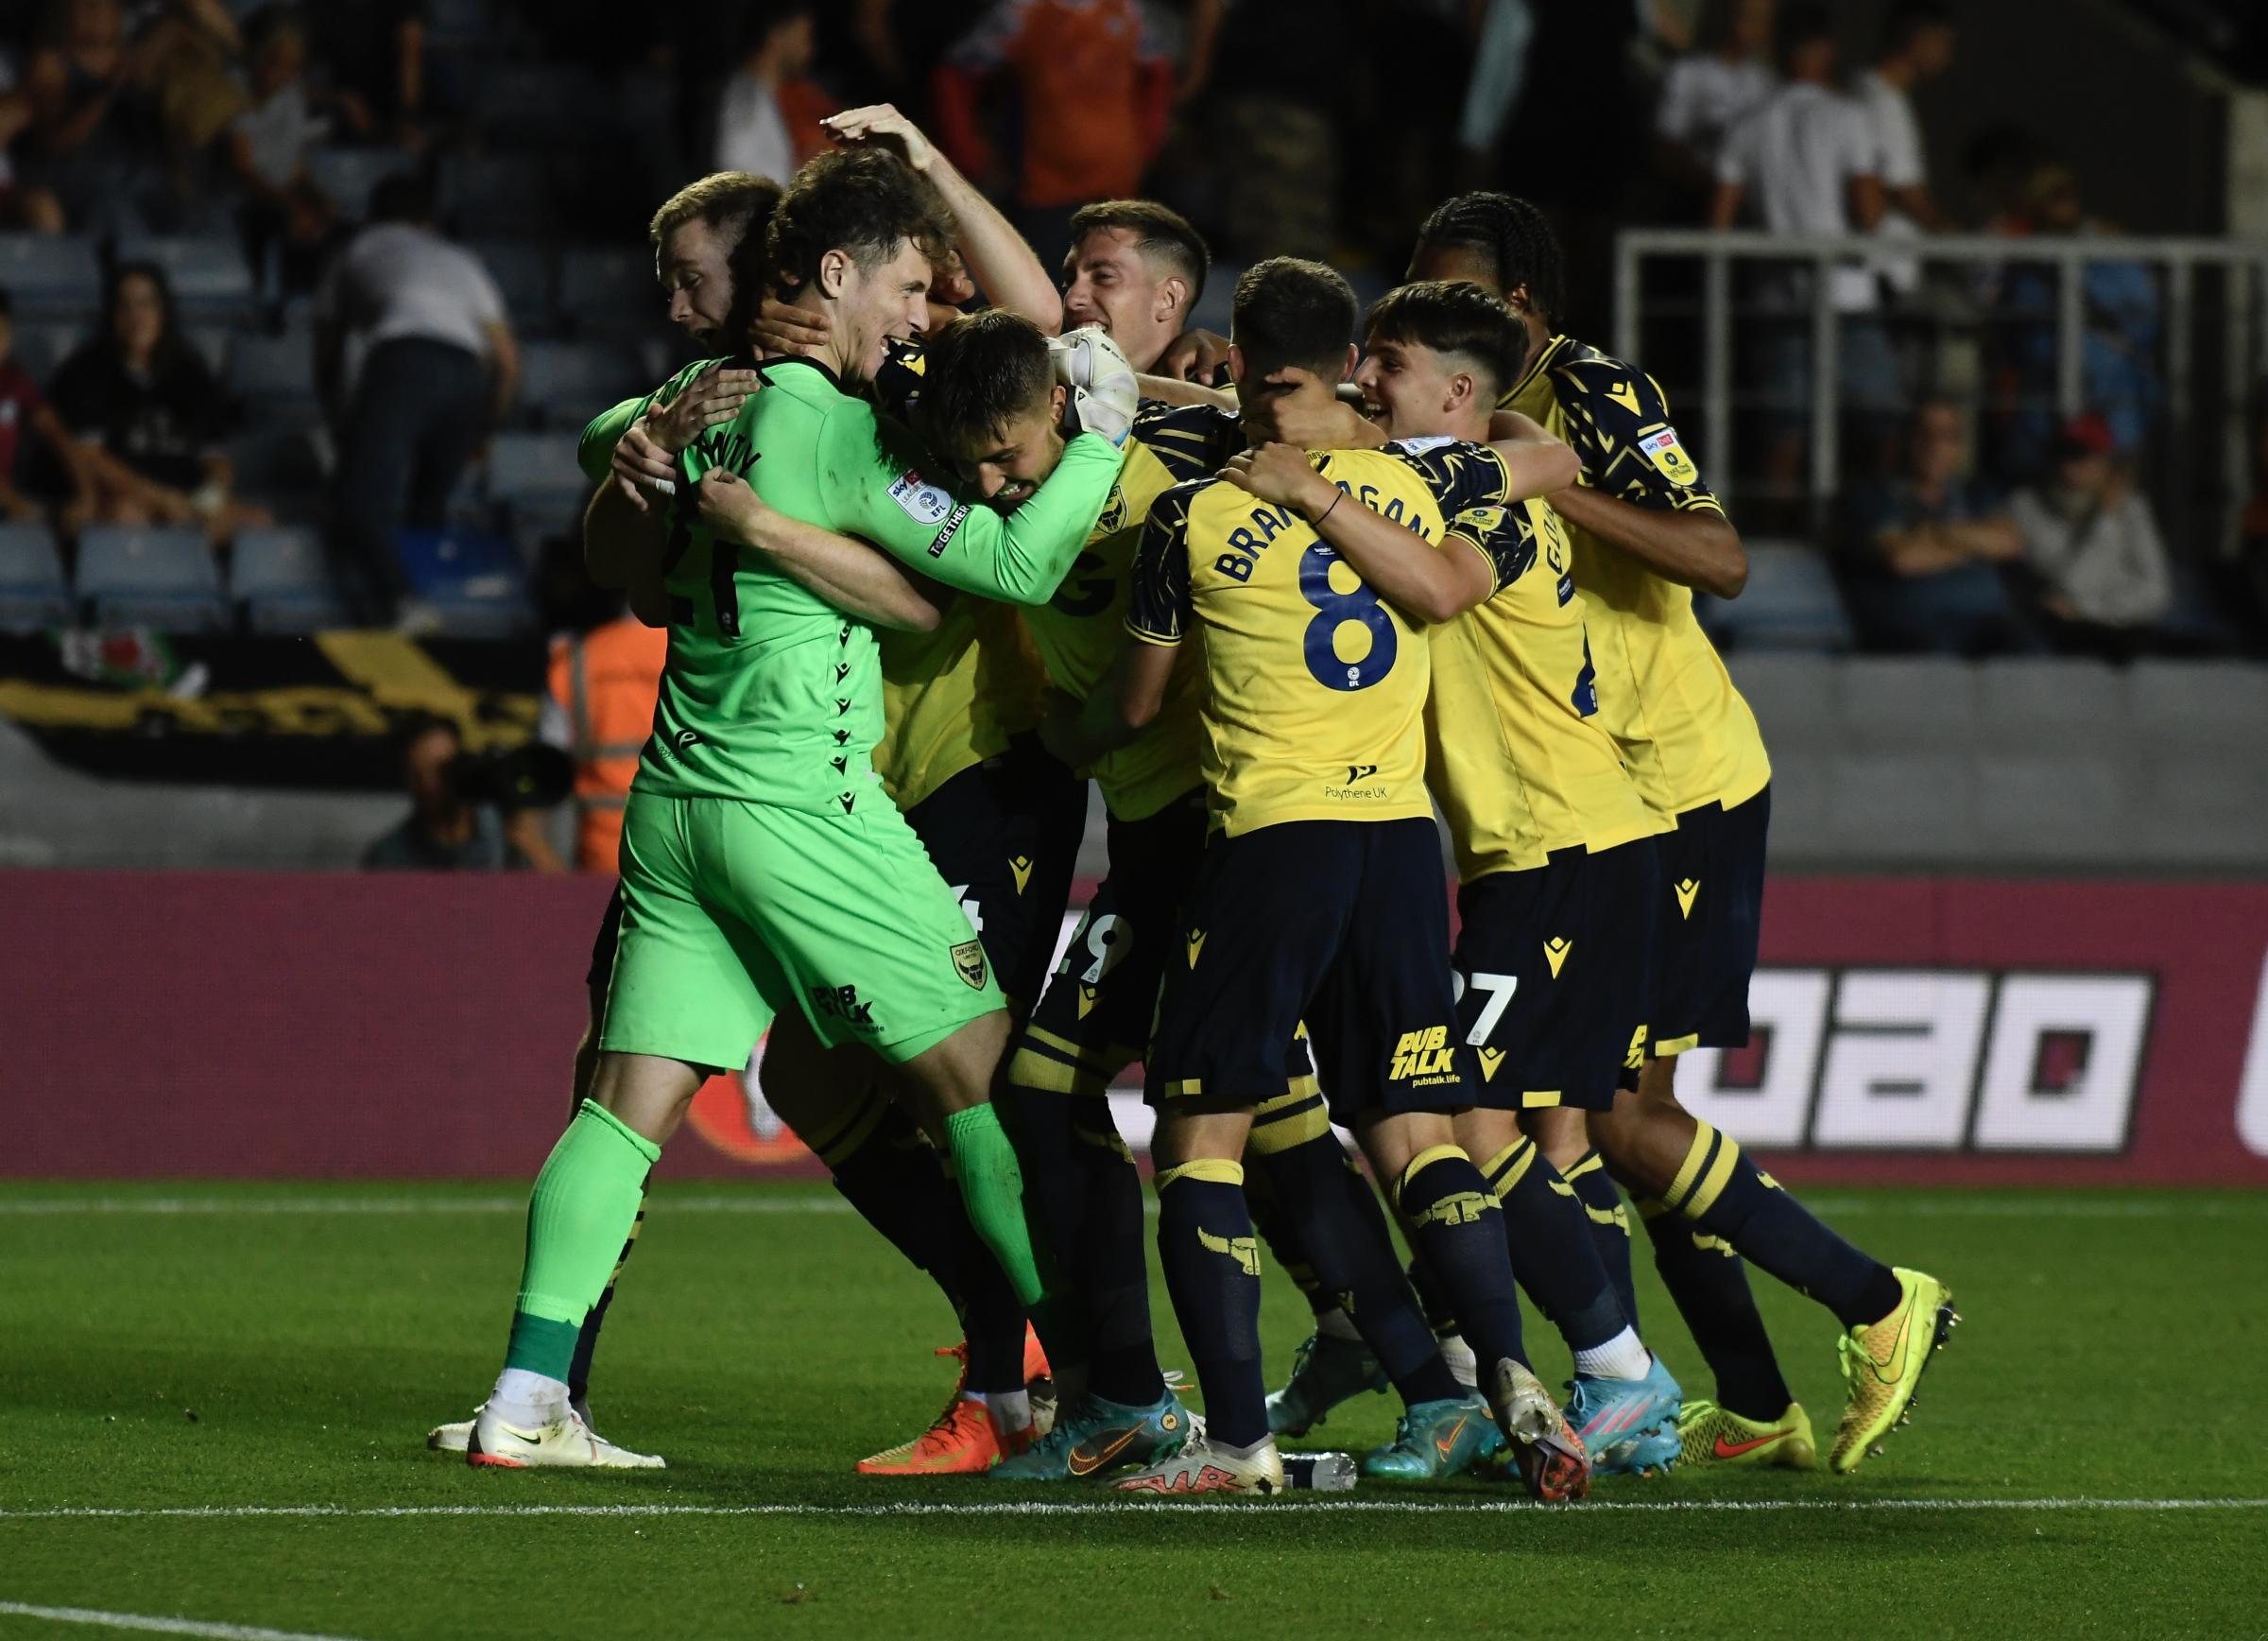 Oxford United goalkeeper Ed McGinty reflects on debut against Swansea City